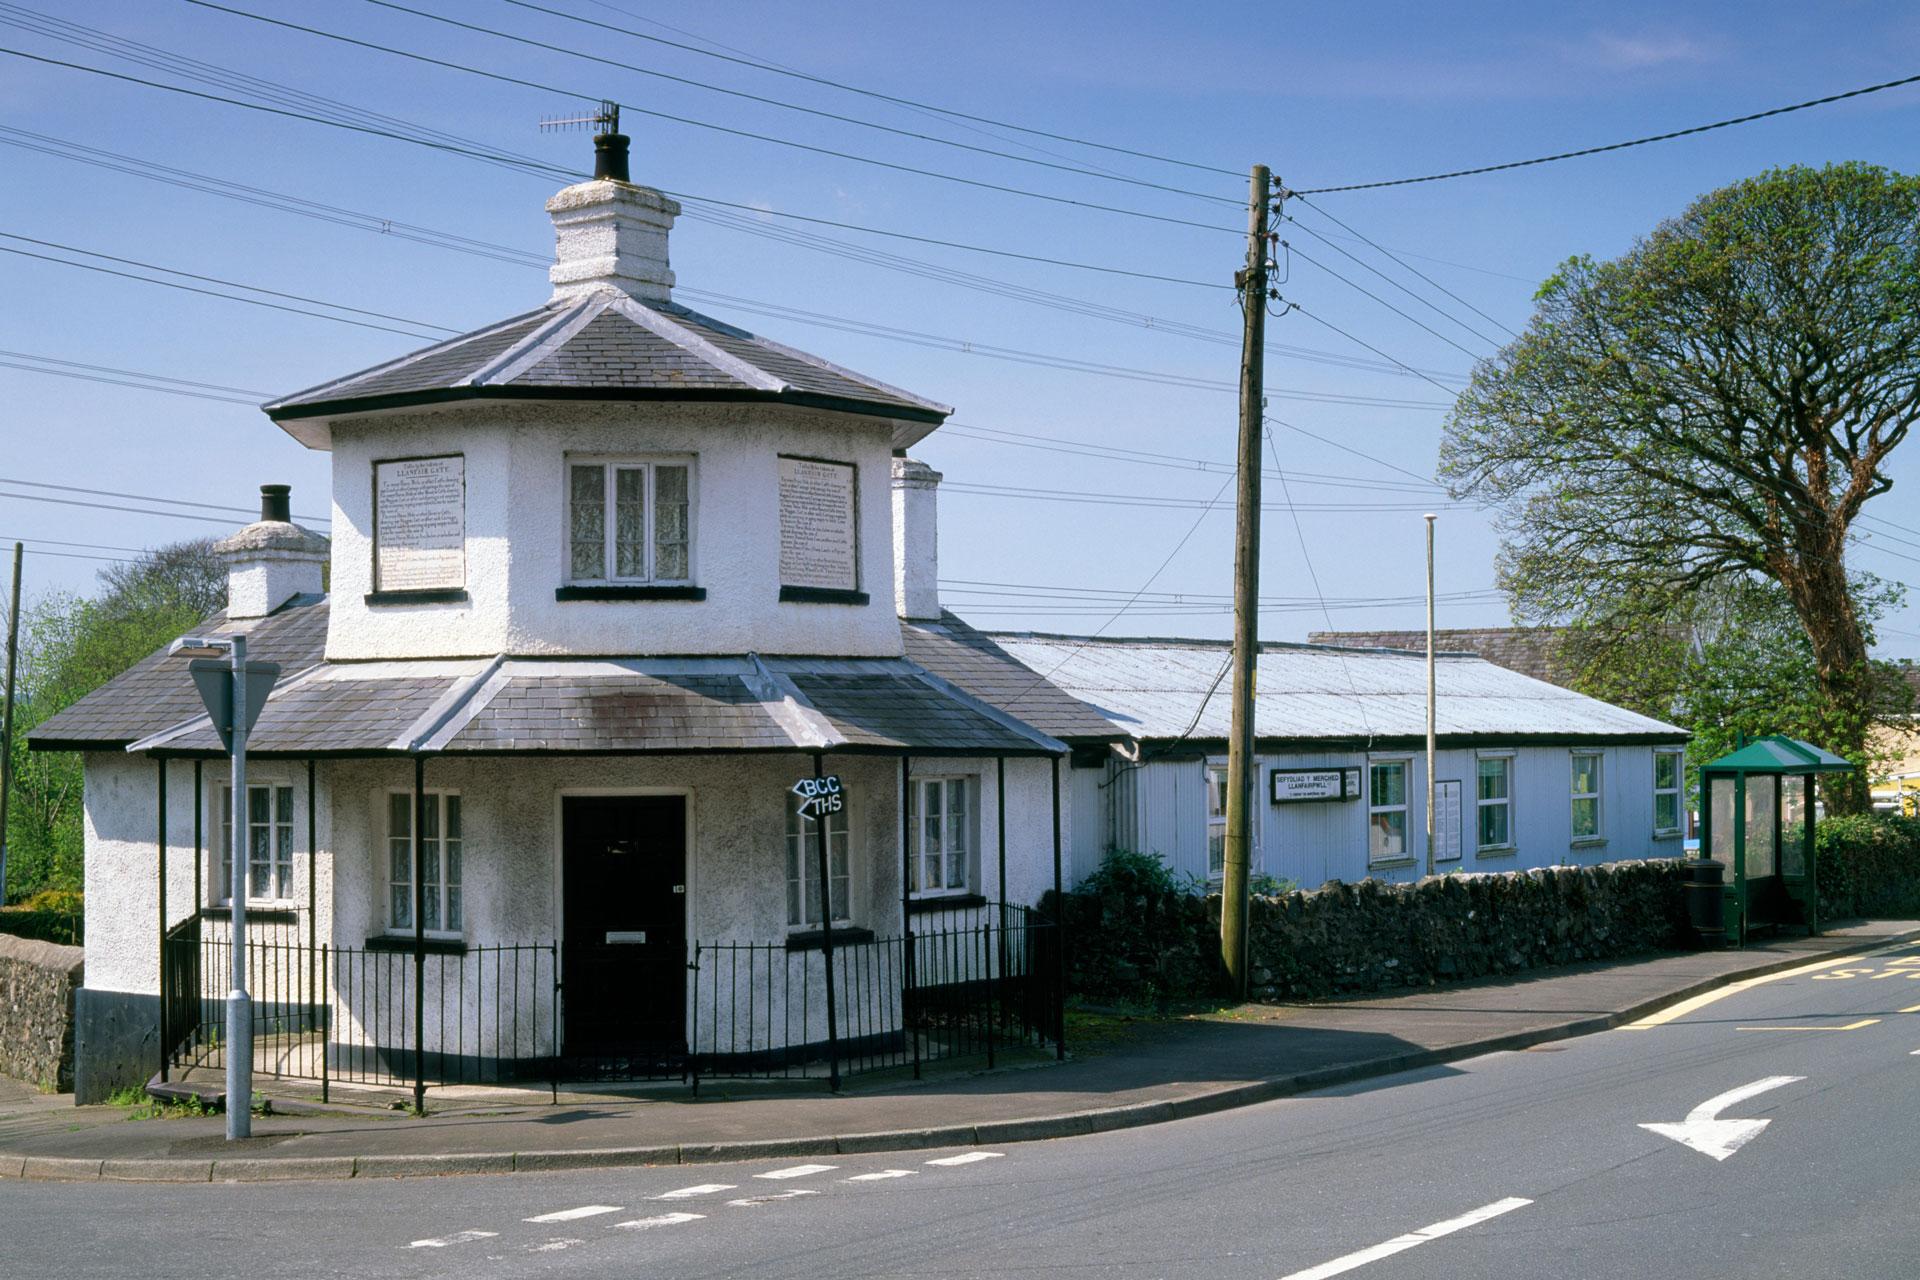 Exterior view of Toll House at Llanfairpwll, Anglesey